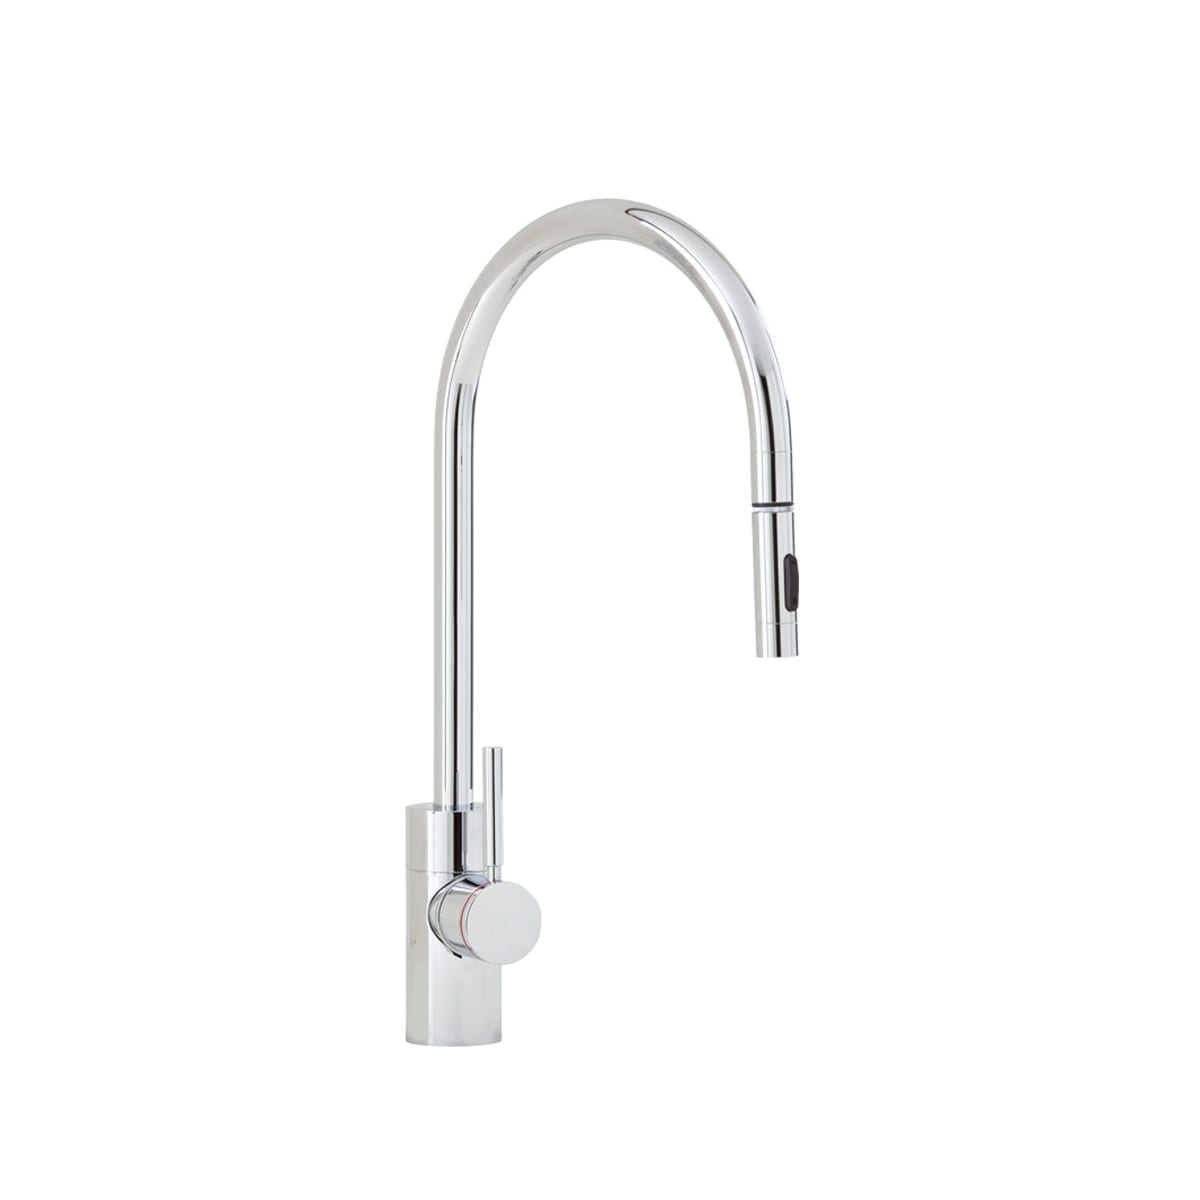 Almond Kitchen Faucet Pull Out | Wow Blog